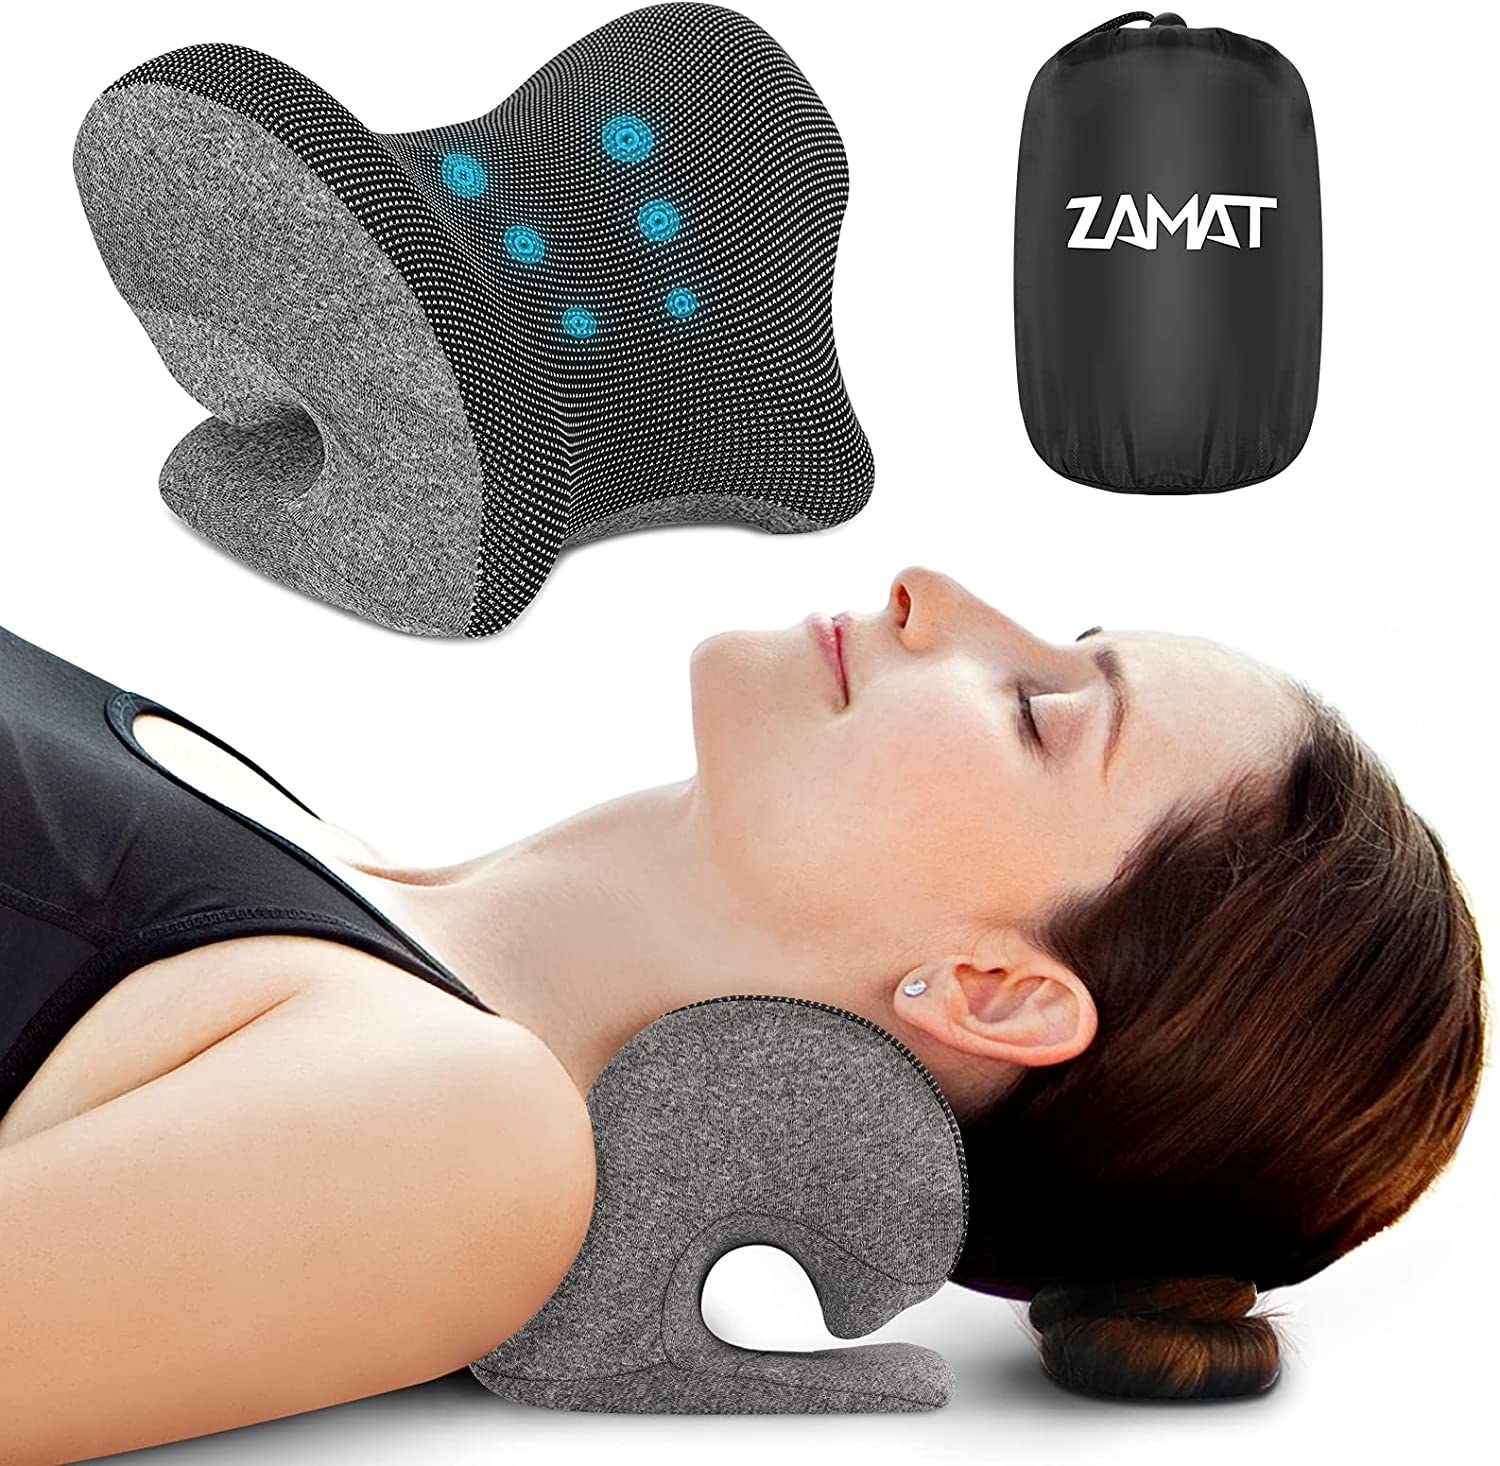 Model using the neck pillow